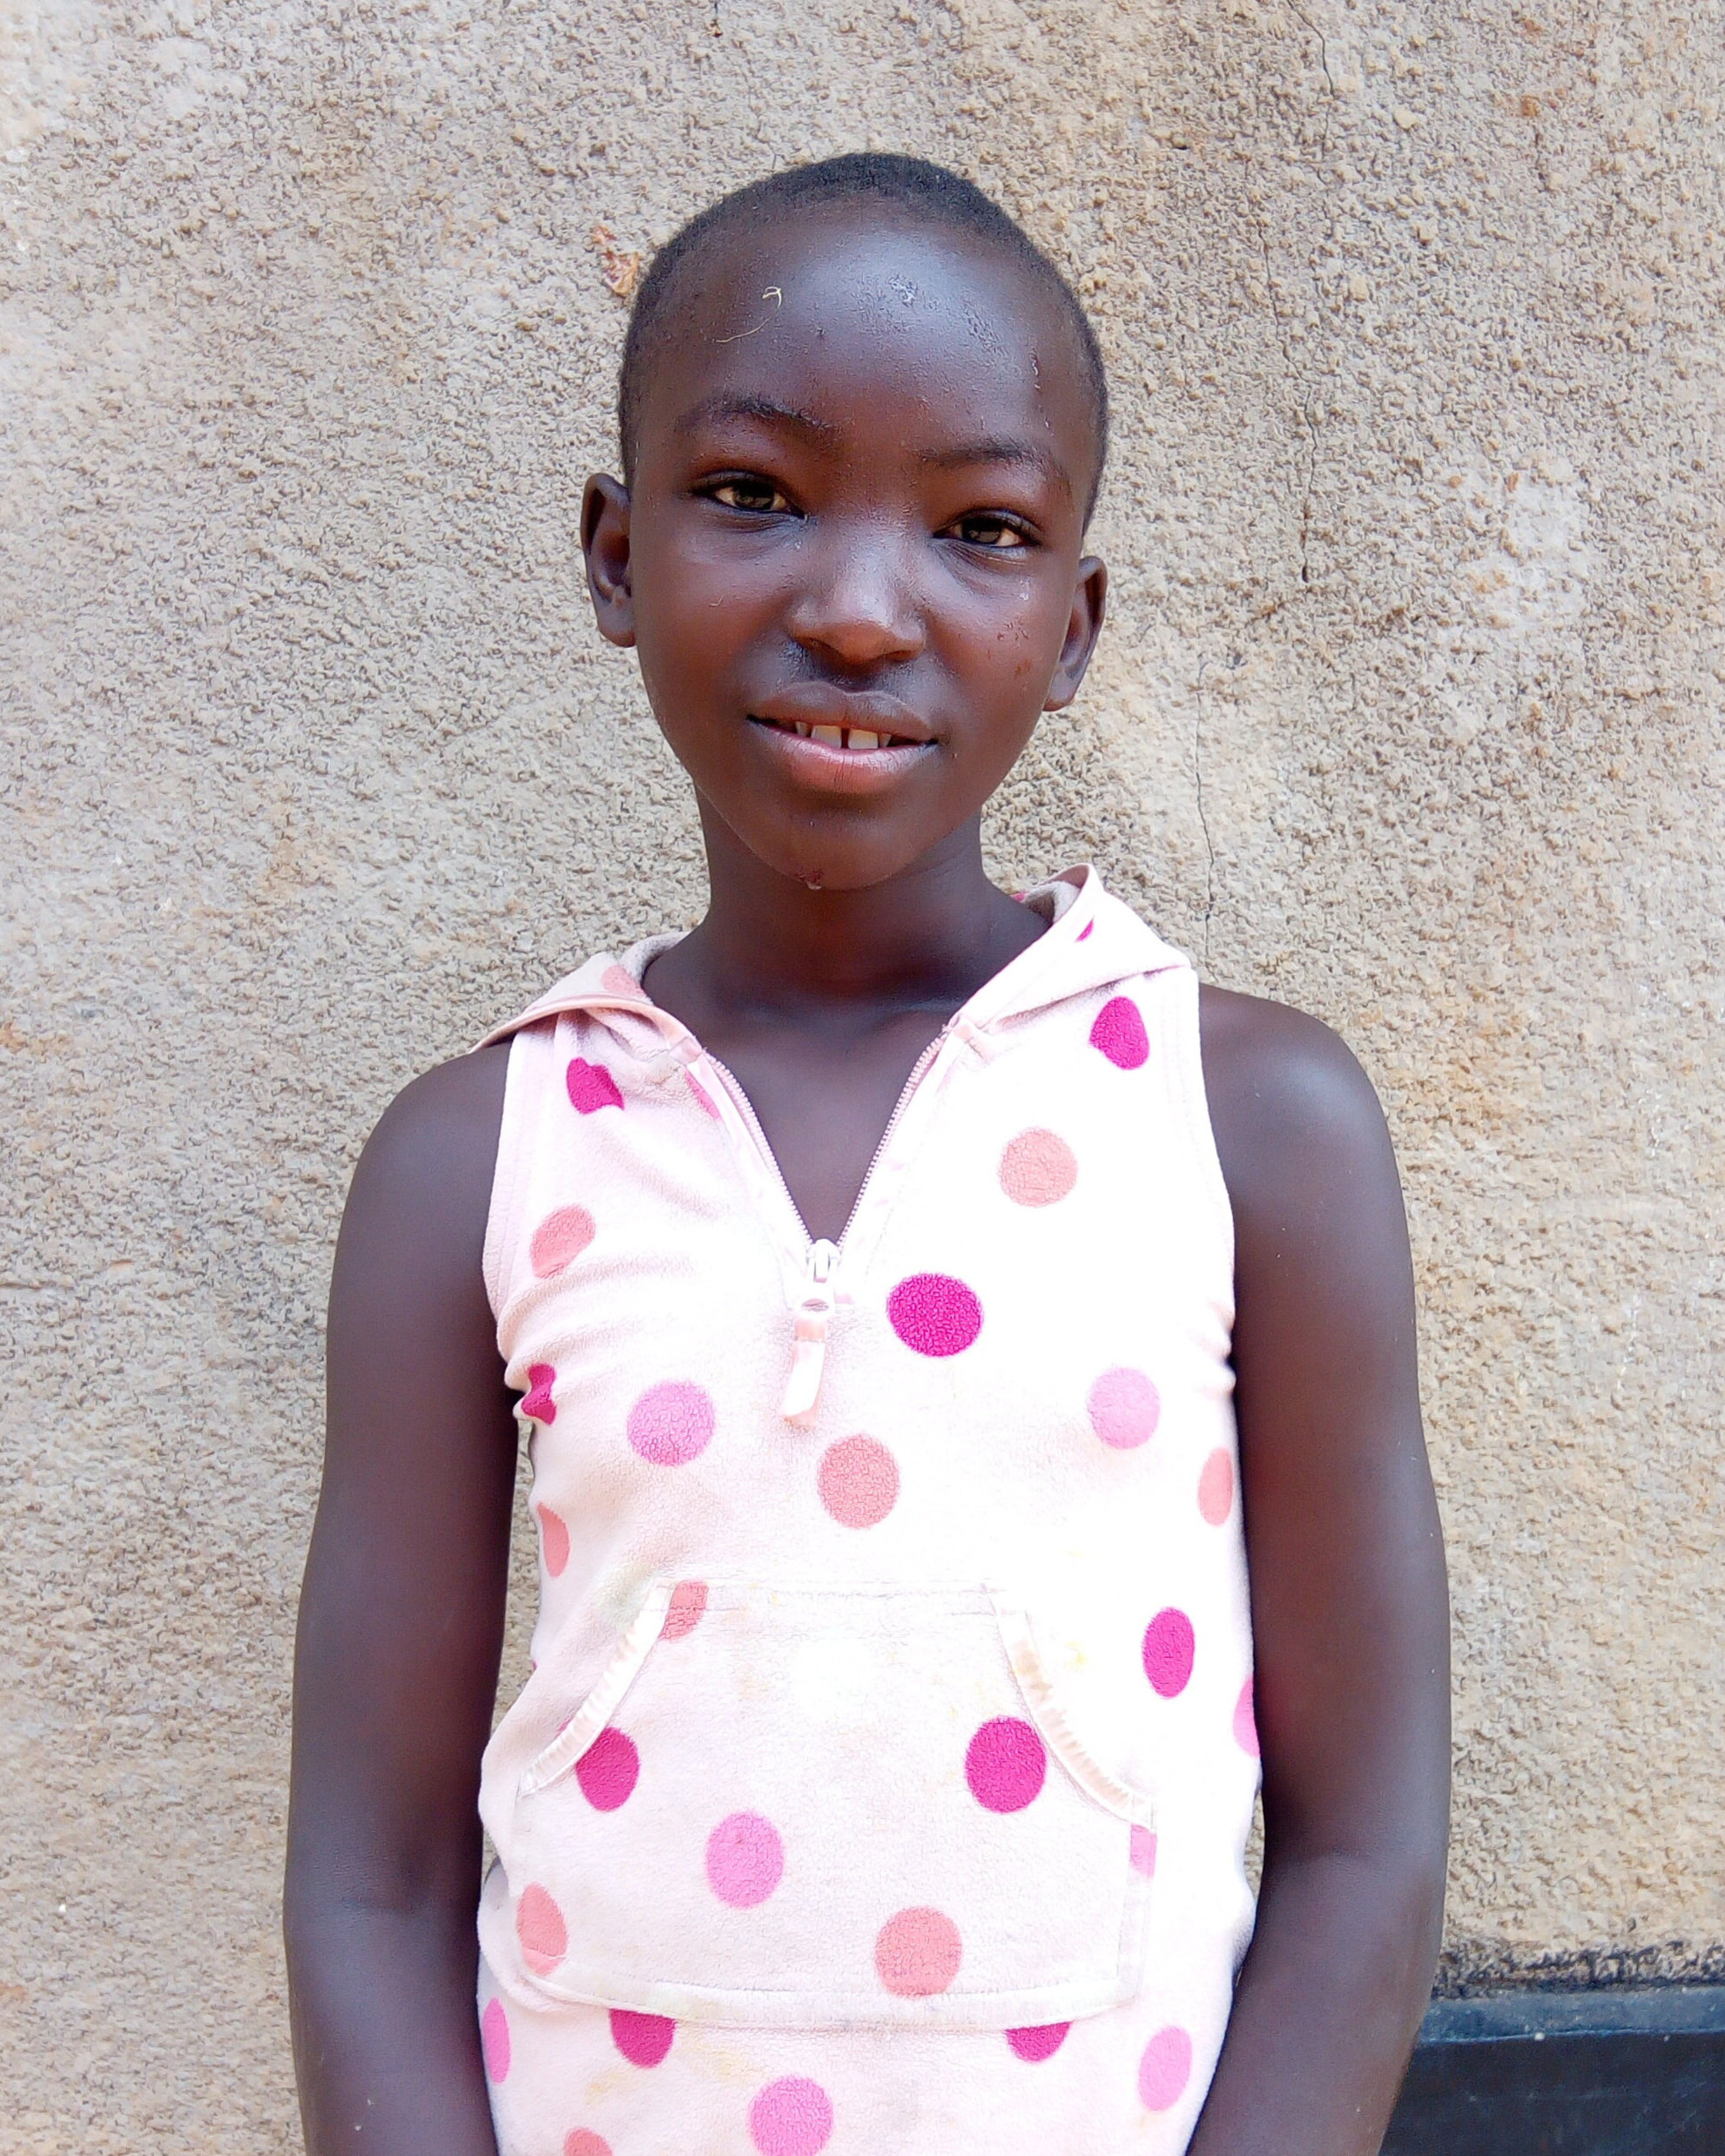 Kelia has been “passed by” many. When her father died soon after her birth, her mother left her with an uncle. She now lives with a family of six. Would you consider “stopping by” and becoming her sponsor?